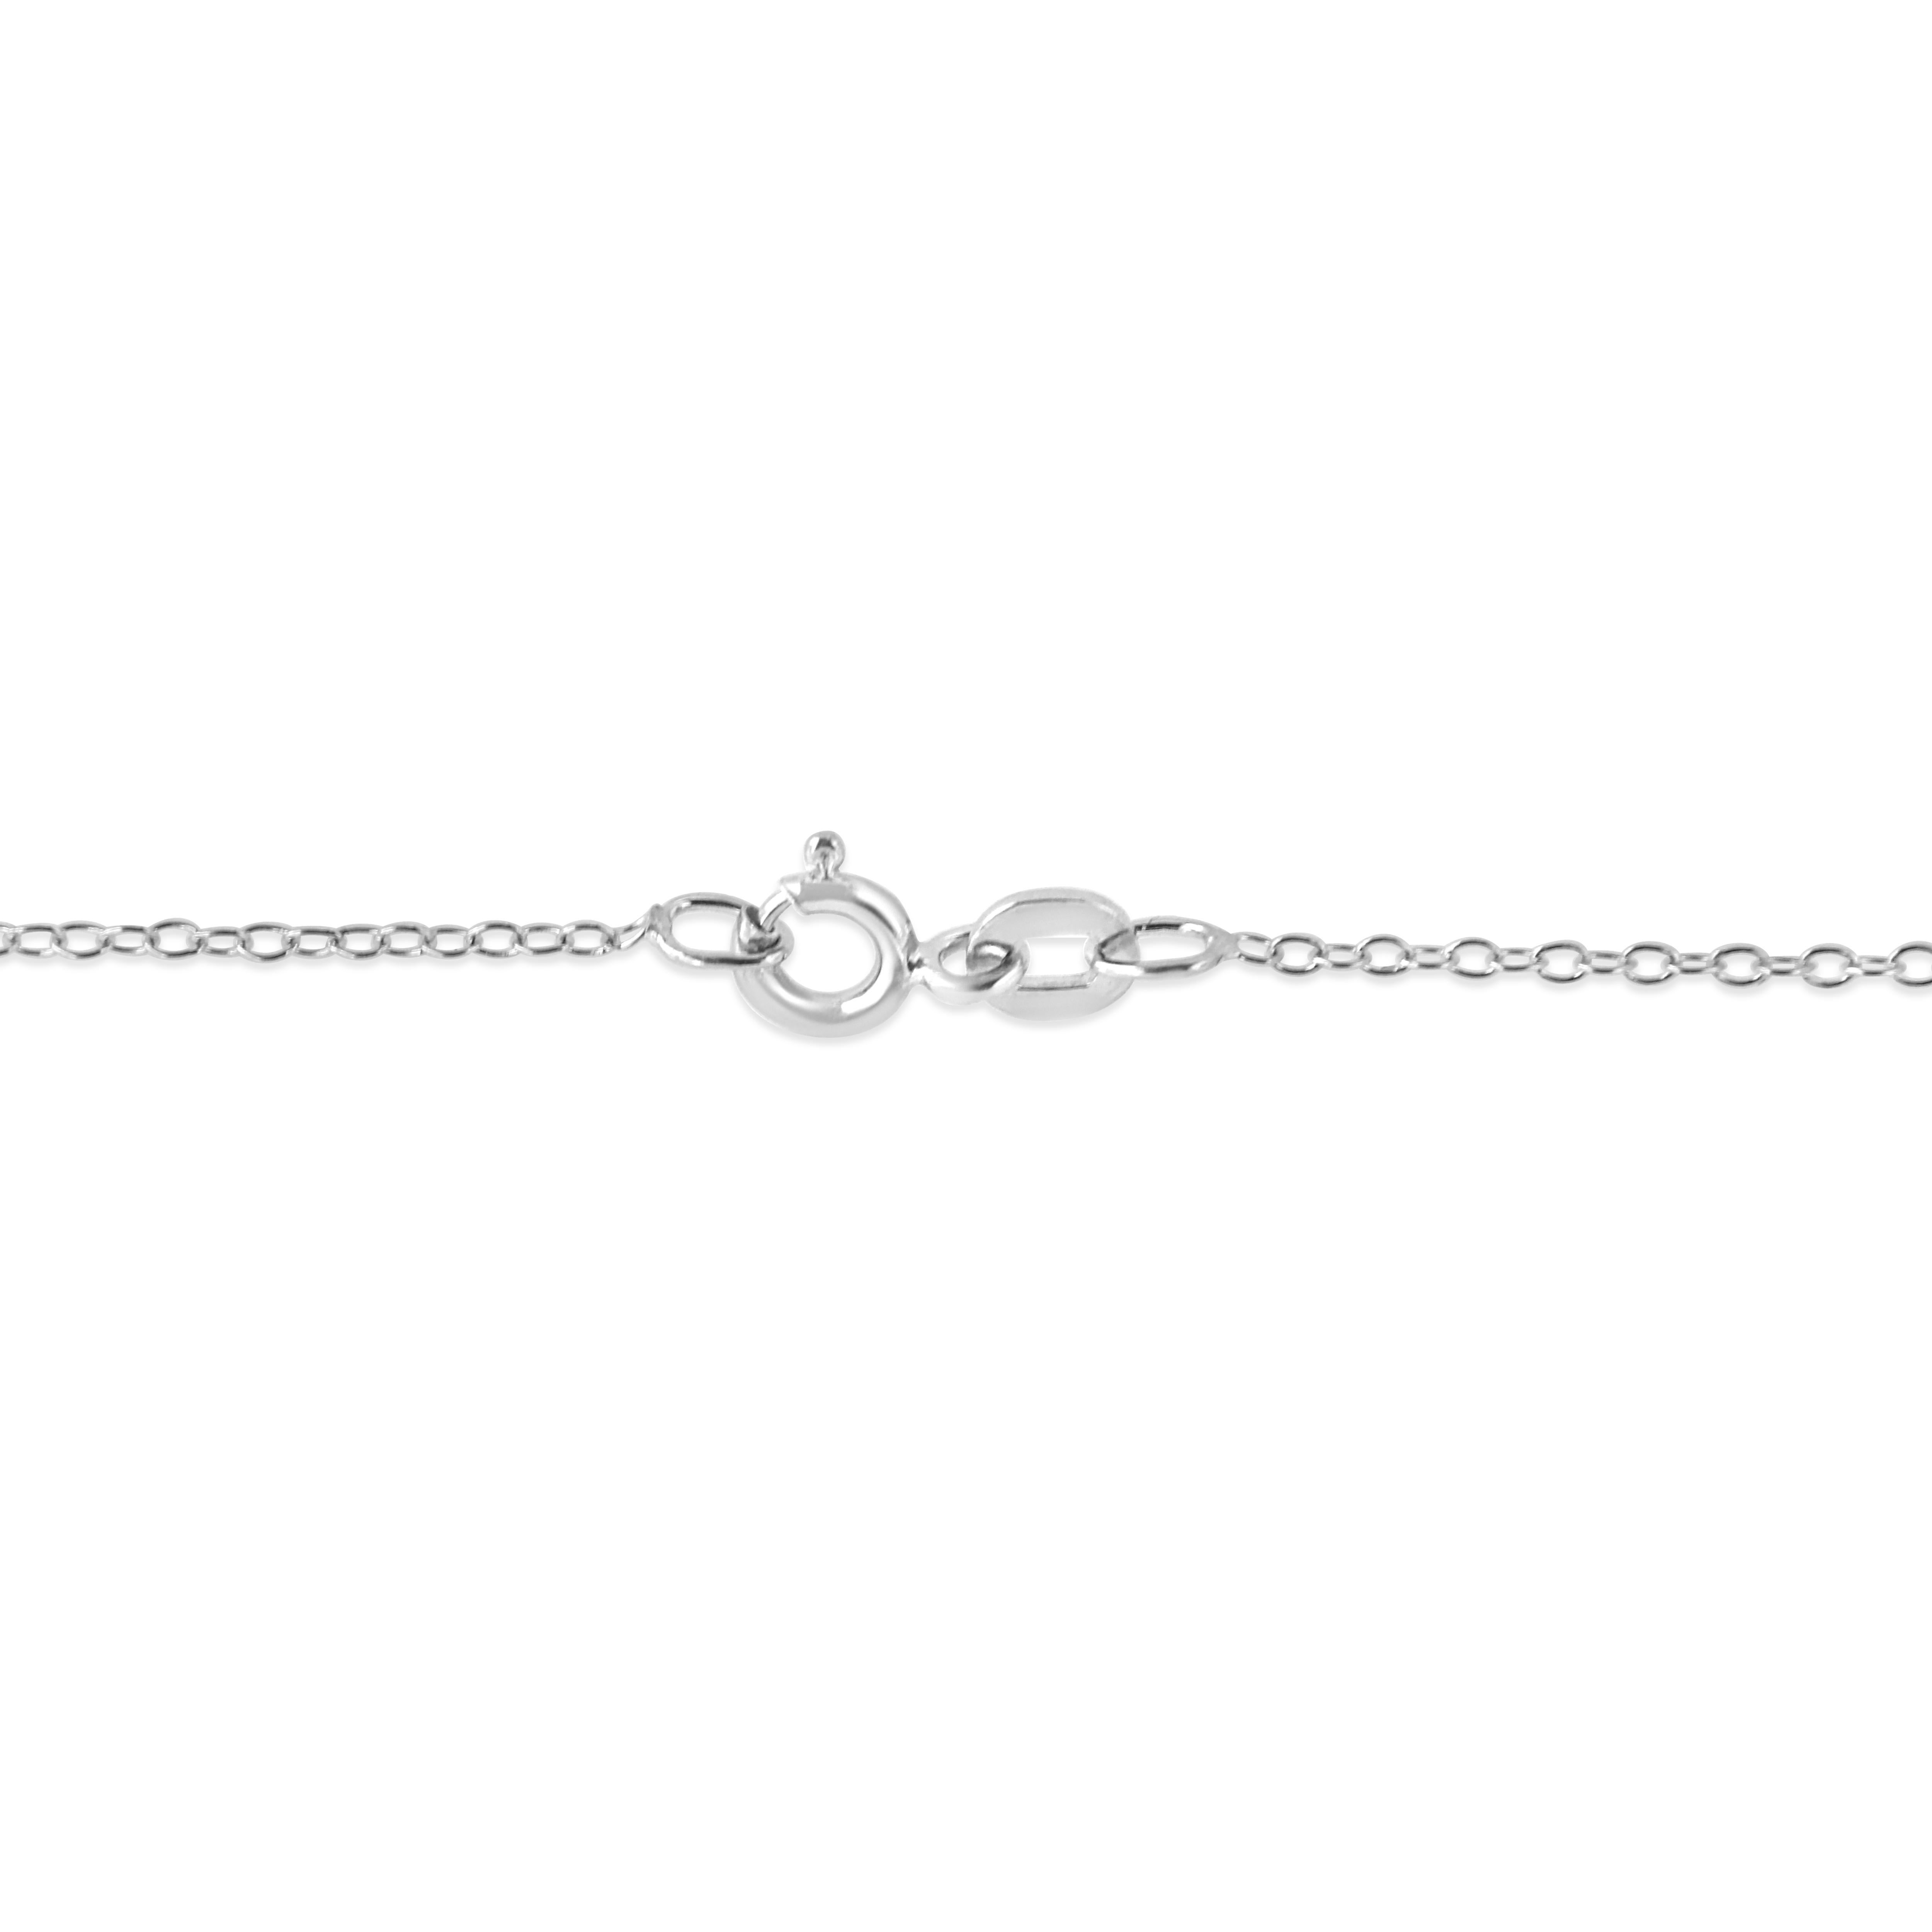 Modern and classic with a unique twist, this bezel set pendant features a single round-cut diamond with a stunning champagne color. Created in genuine .925 sterling silver, plated with rhodium (a platinum-family metal) for a lifetime of tarnish-free